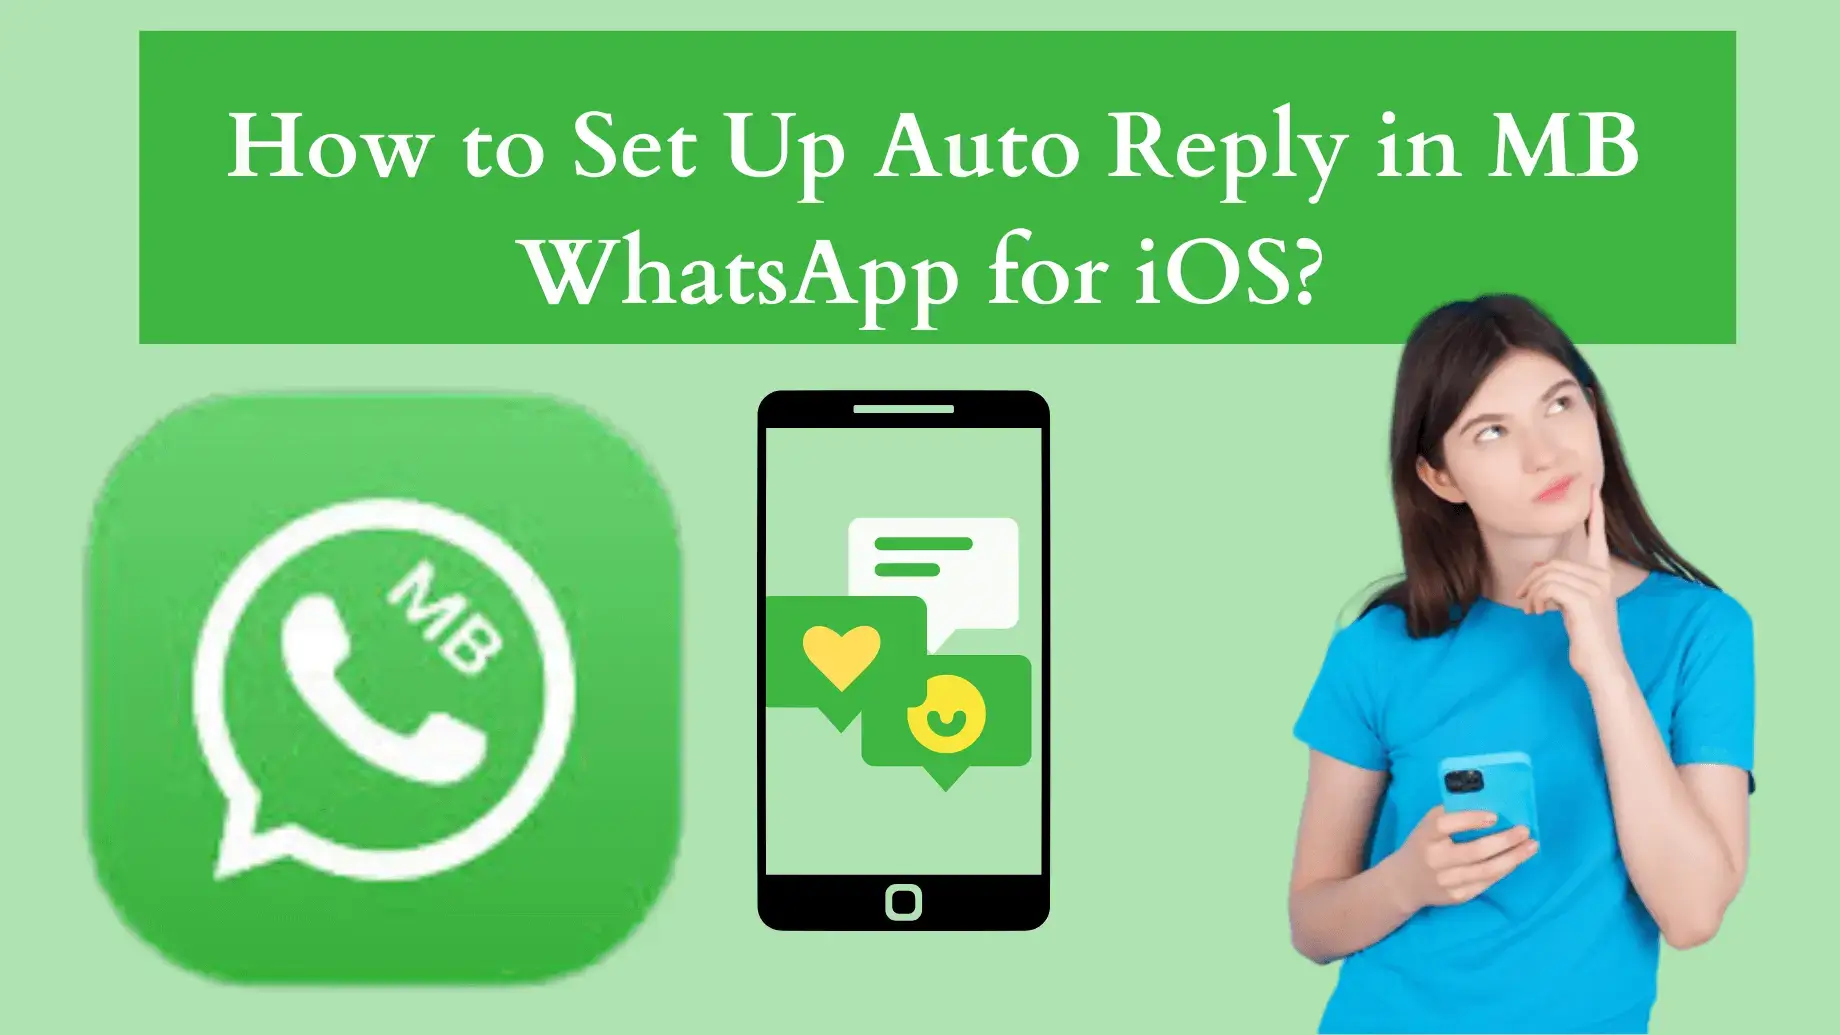 Auto-Reply for WhatsApp